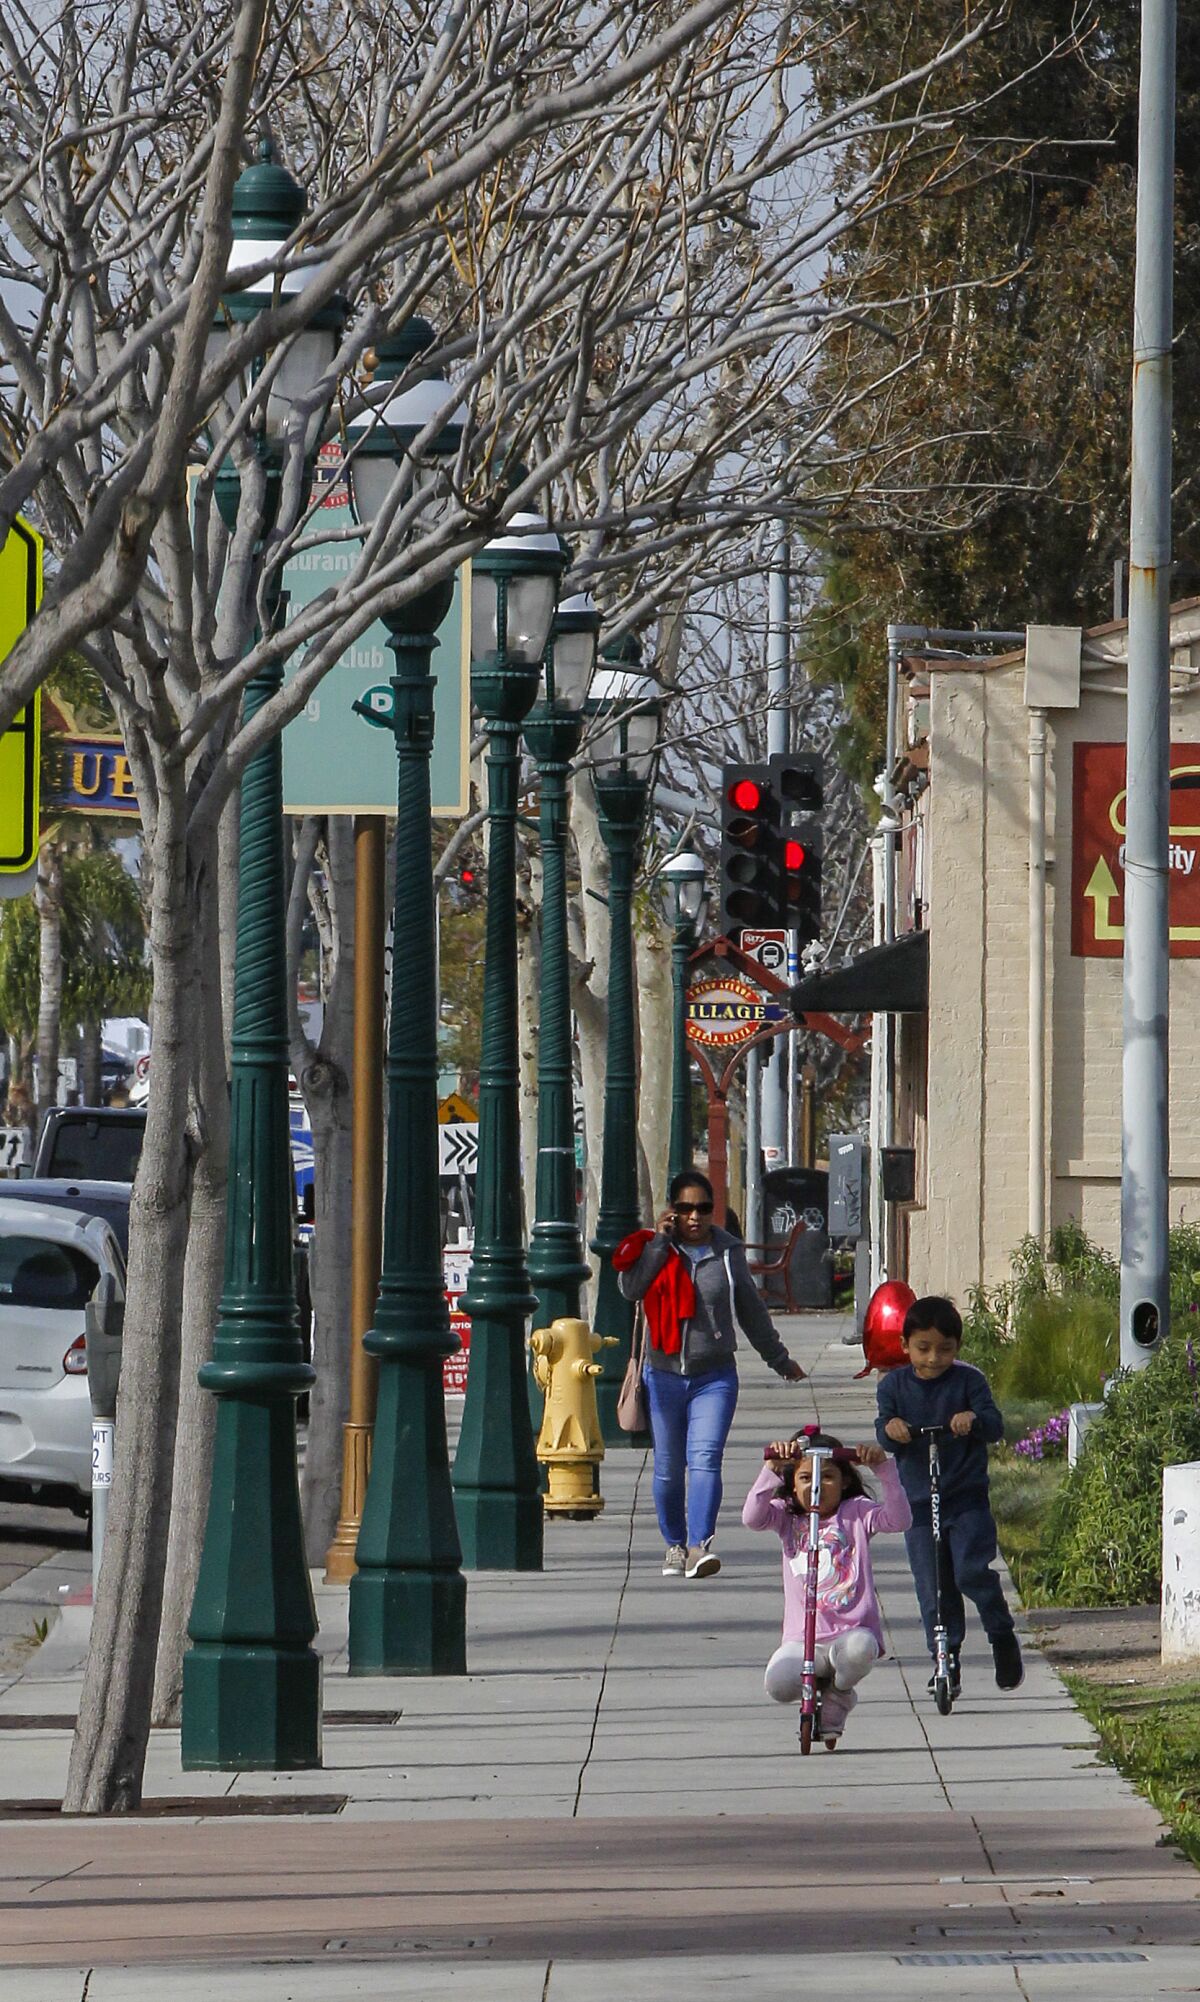 CHULA VISTA - FEB.16: A view of a sidewalk lined with street lamps as part of the completed project along Third Ave.